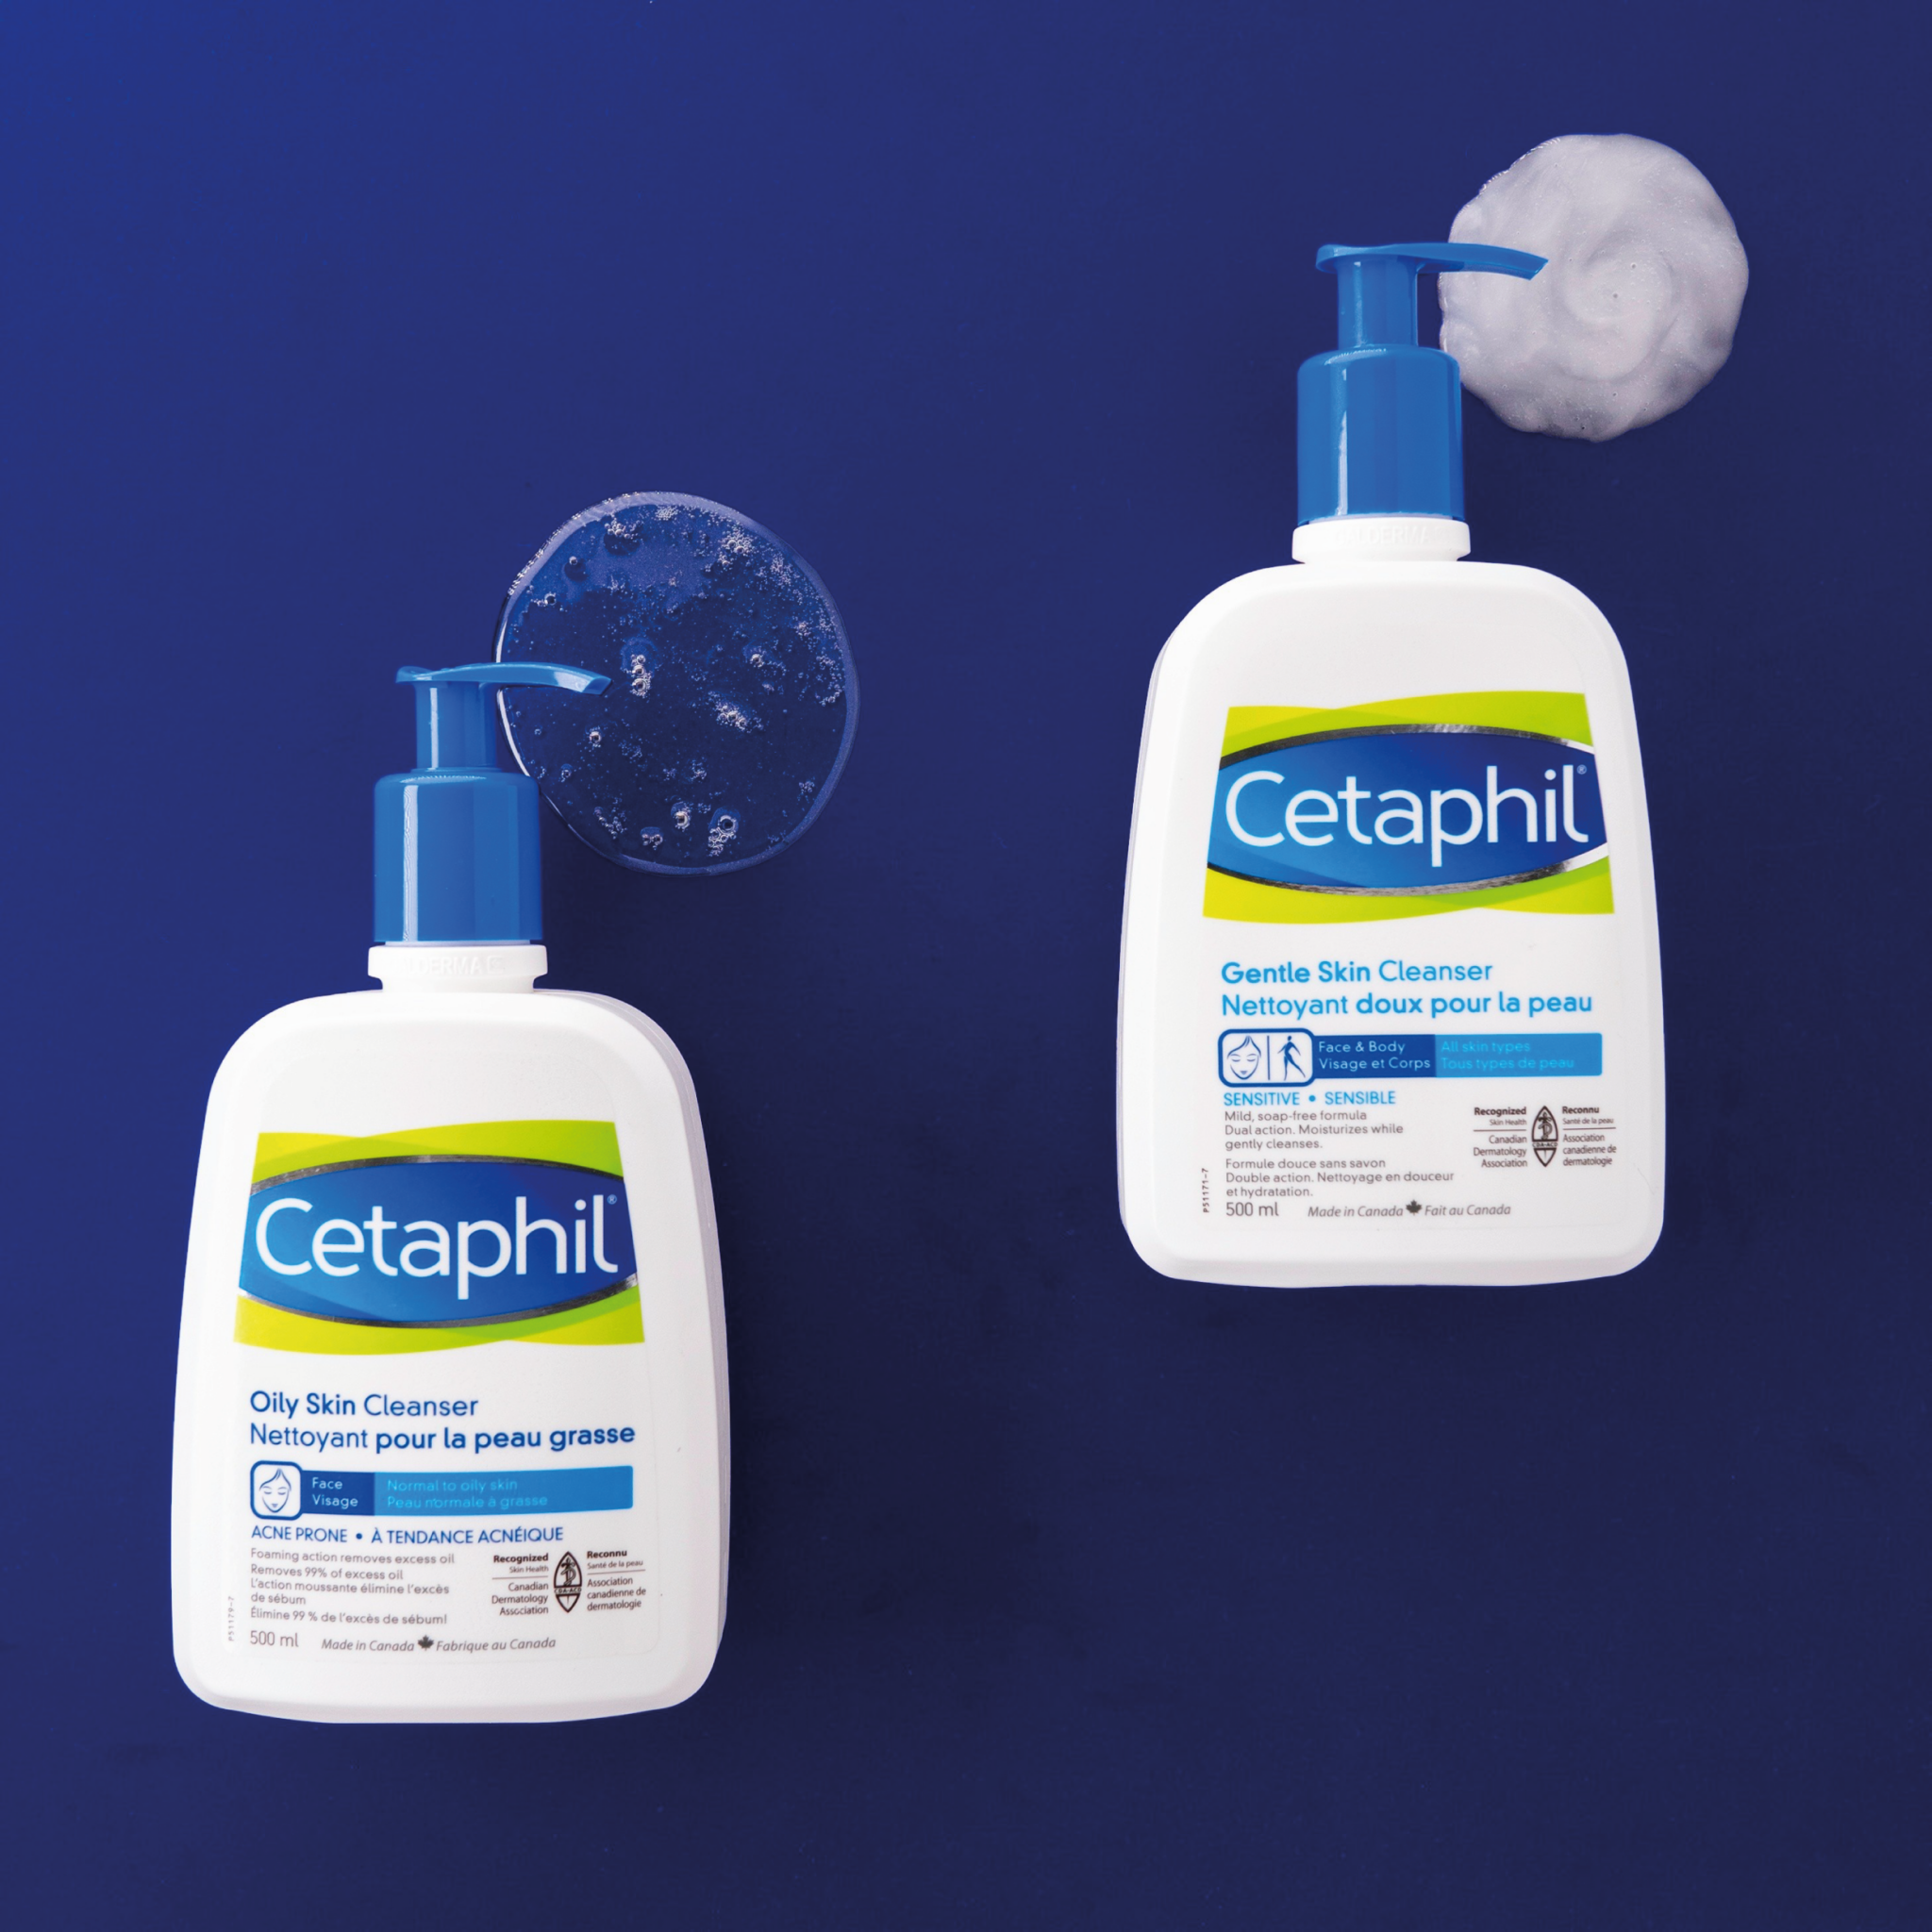 Two bottles of Cetaphil hand soap on a blue surface.